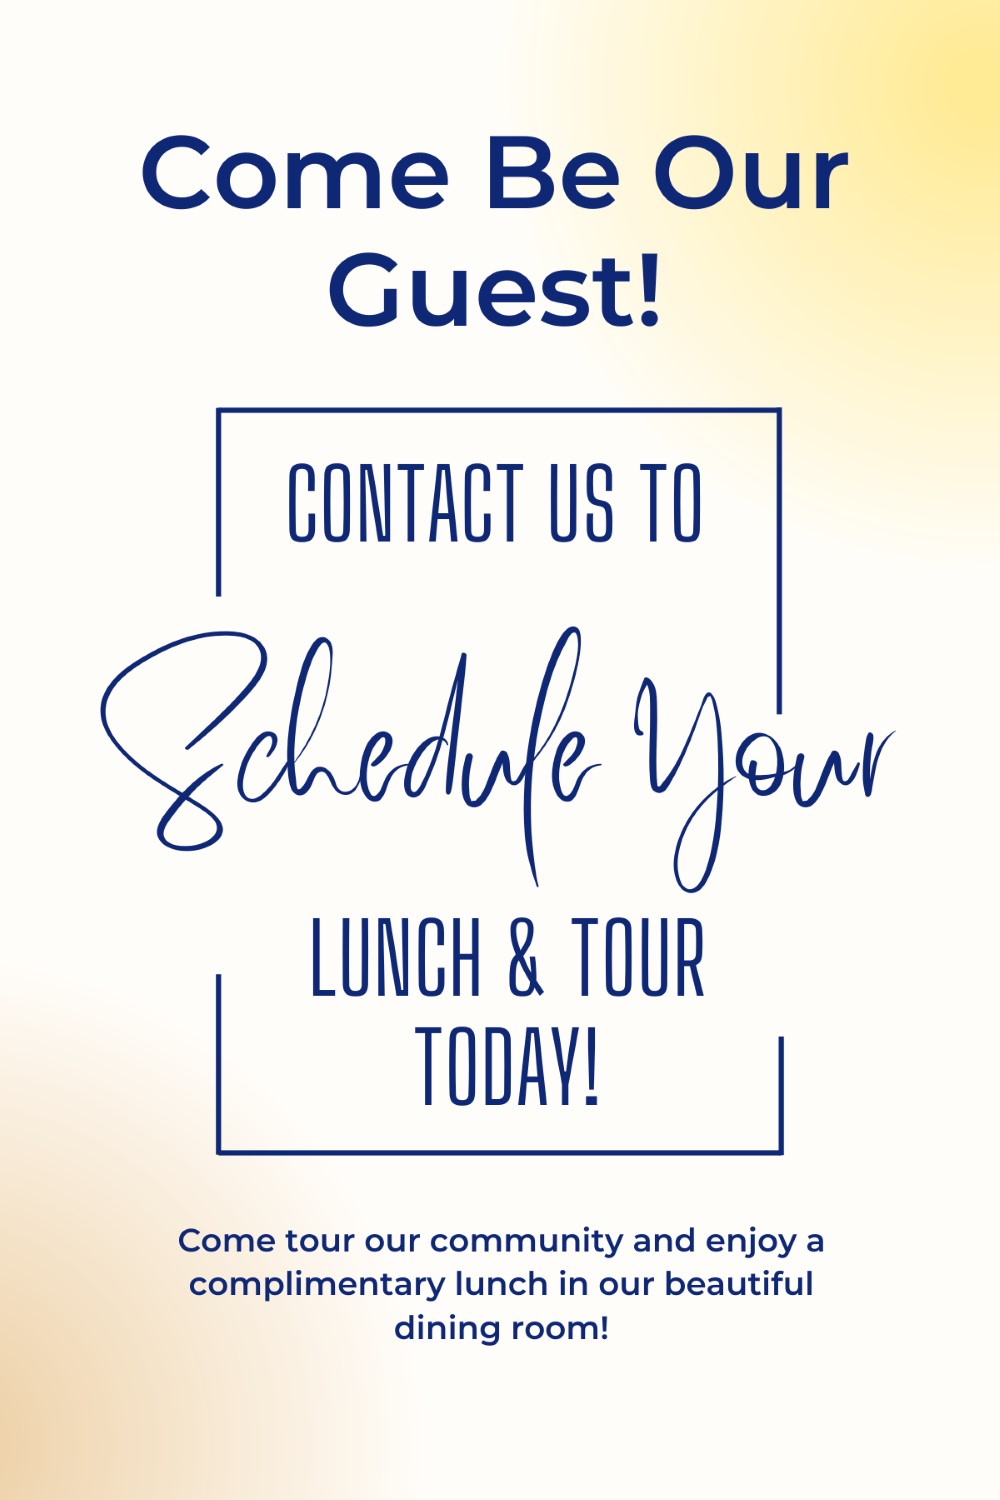 Come Be Our Guest! Lunch and Tour - Schedule Today. Come tour our community and enjoy a complimentary lunch in our beautiful dining room.